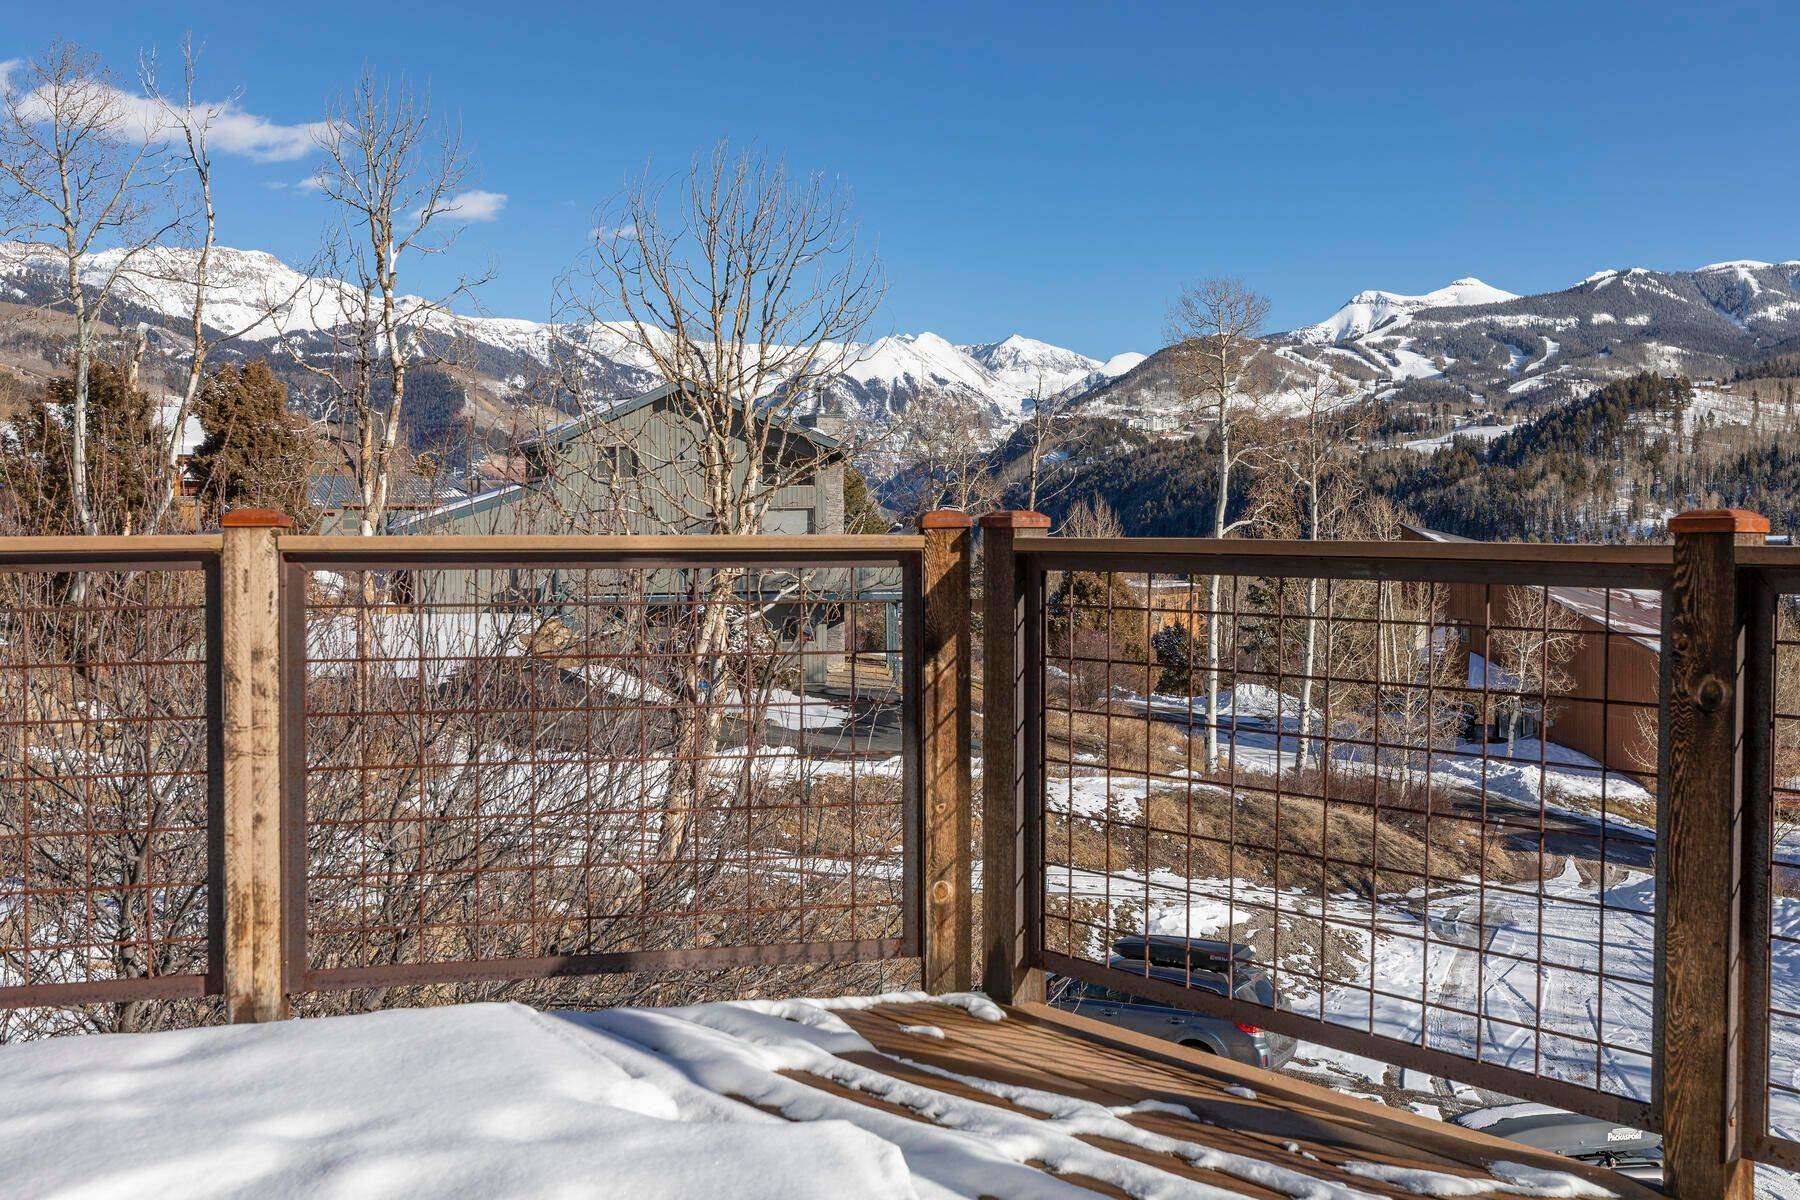 Property for Active at 131 Nimbus Drive, Telluride, CO 81435 131 Nimbus Drive 6B Telluride, Colorado 81435 United States